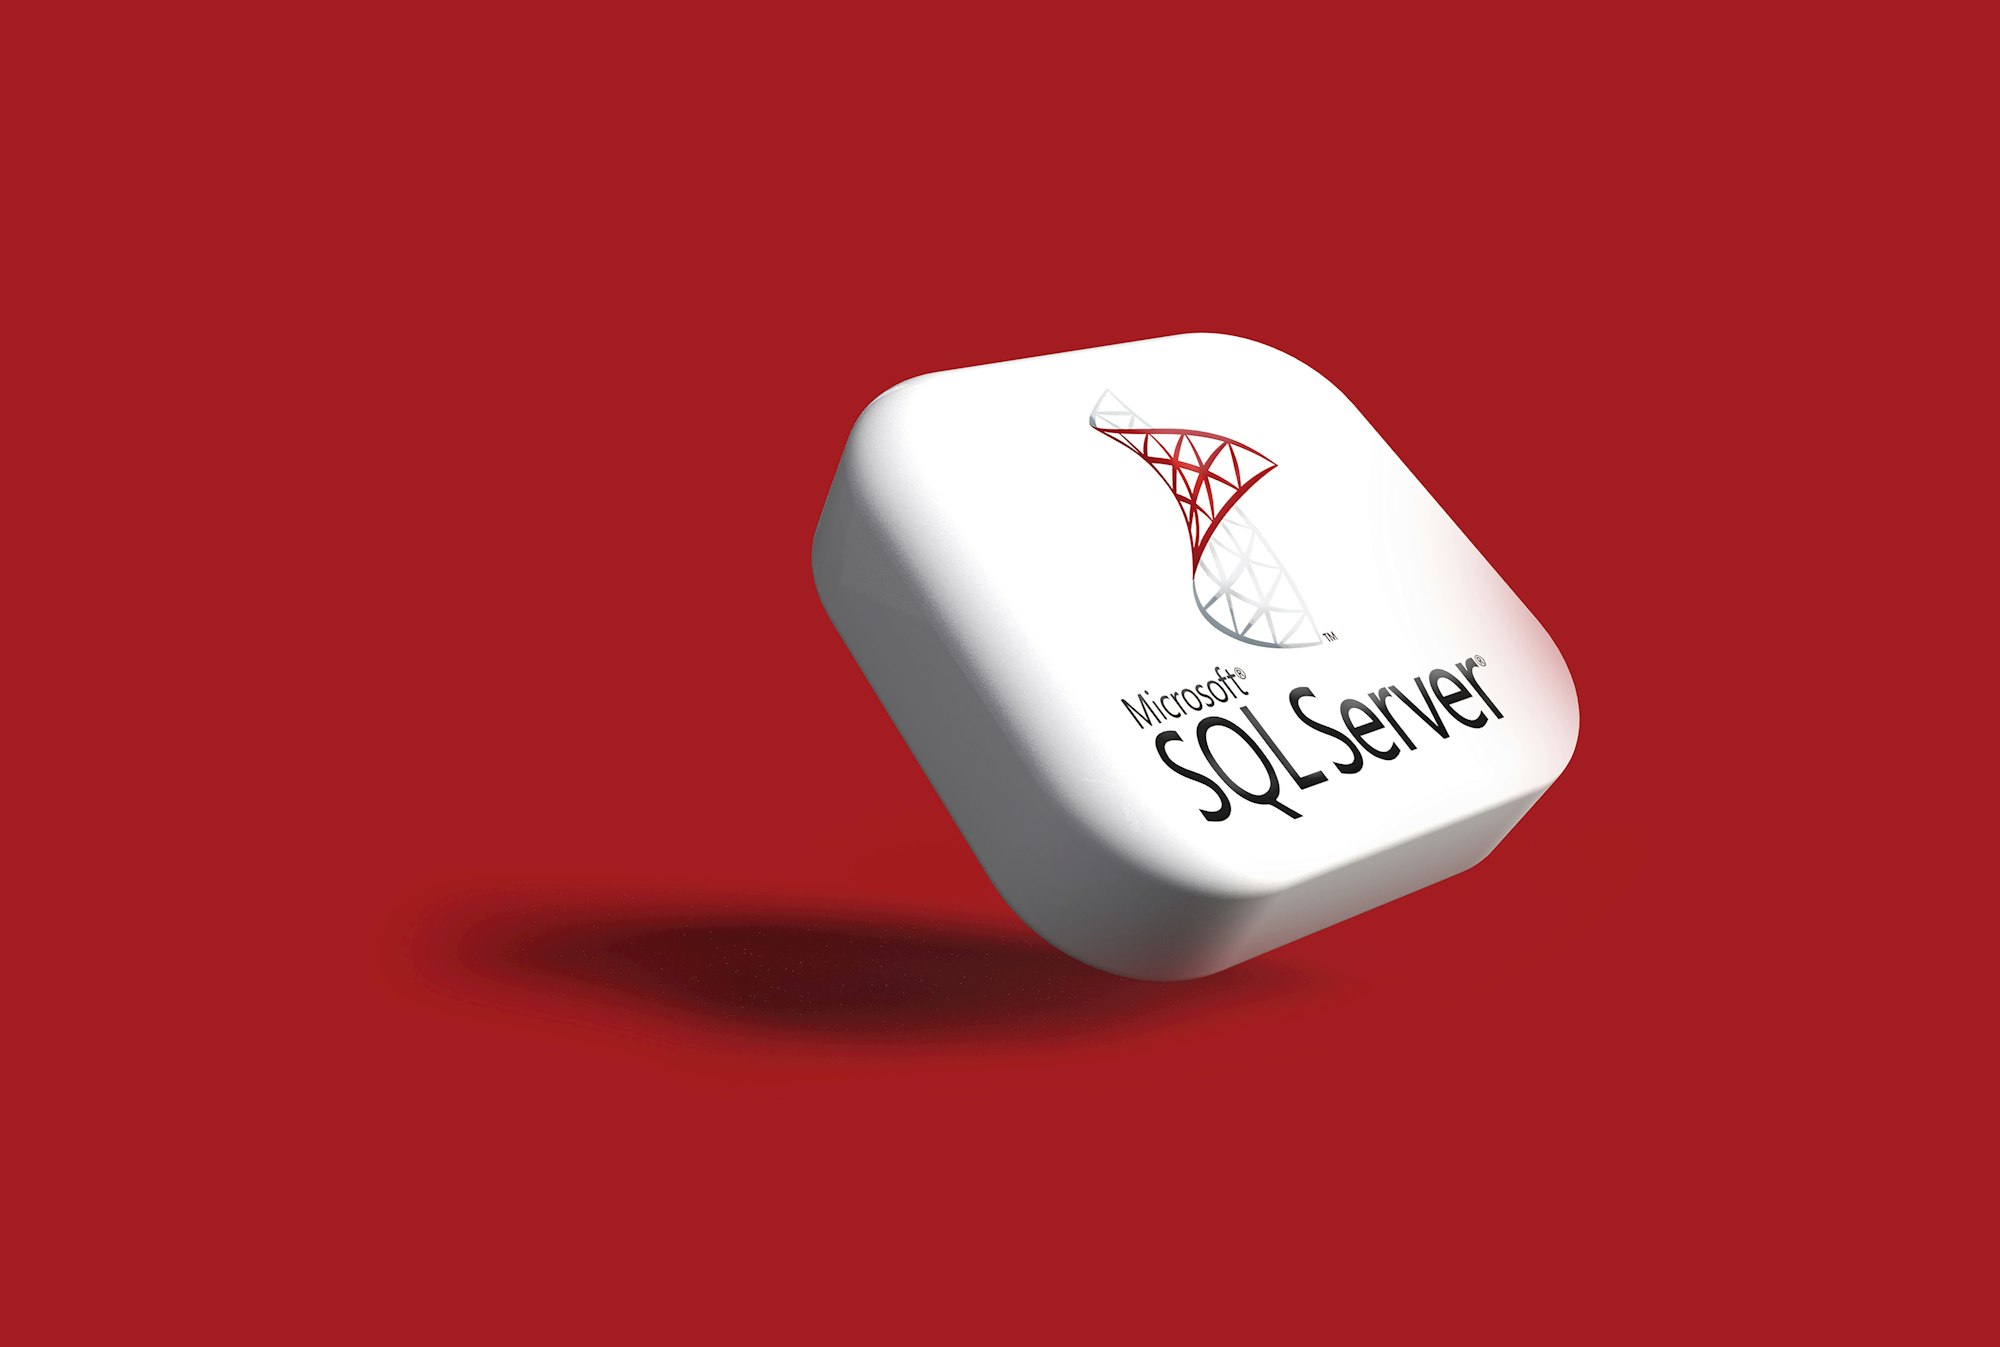 SQL Server icon in 3D. My 3D work may be seen in the section titled "3D Render."